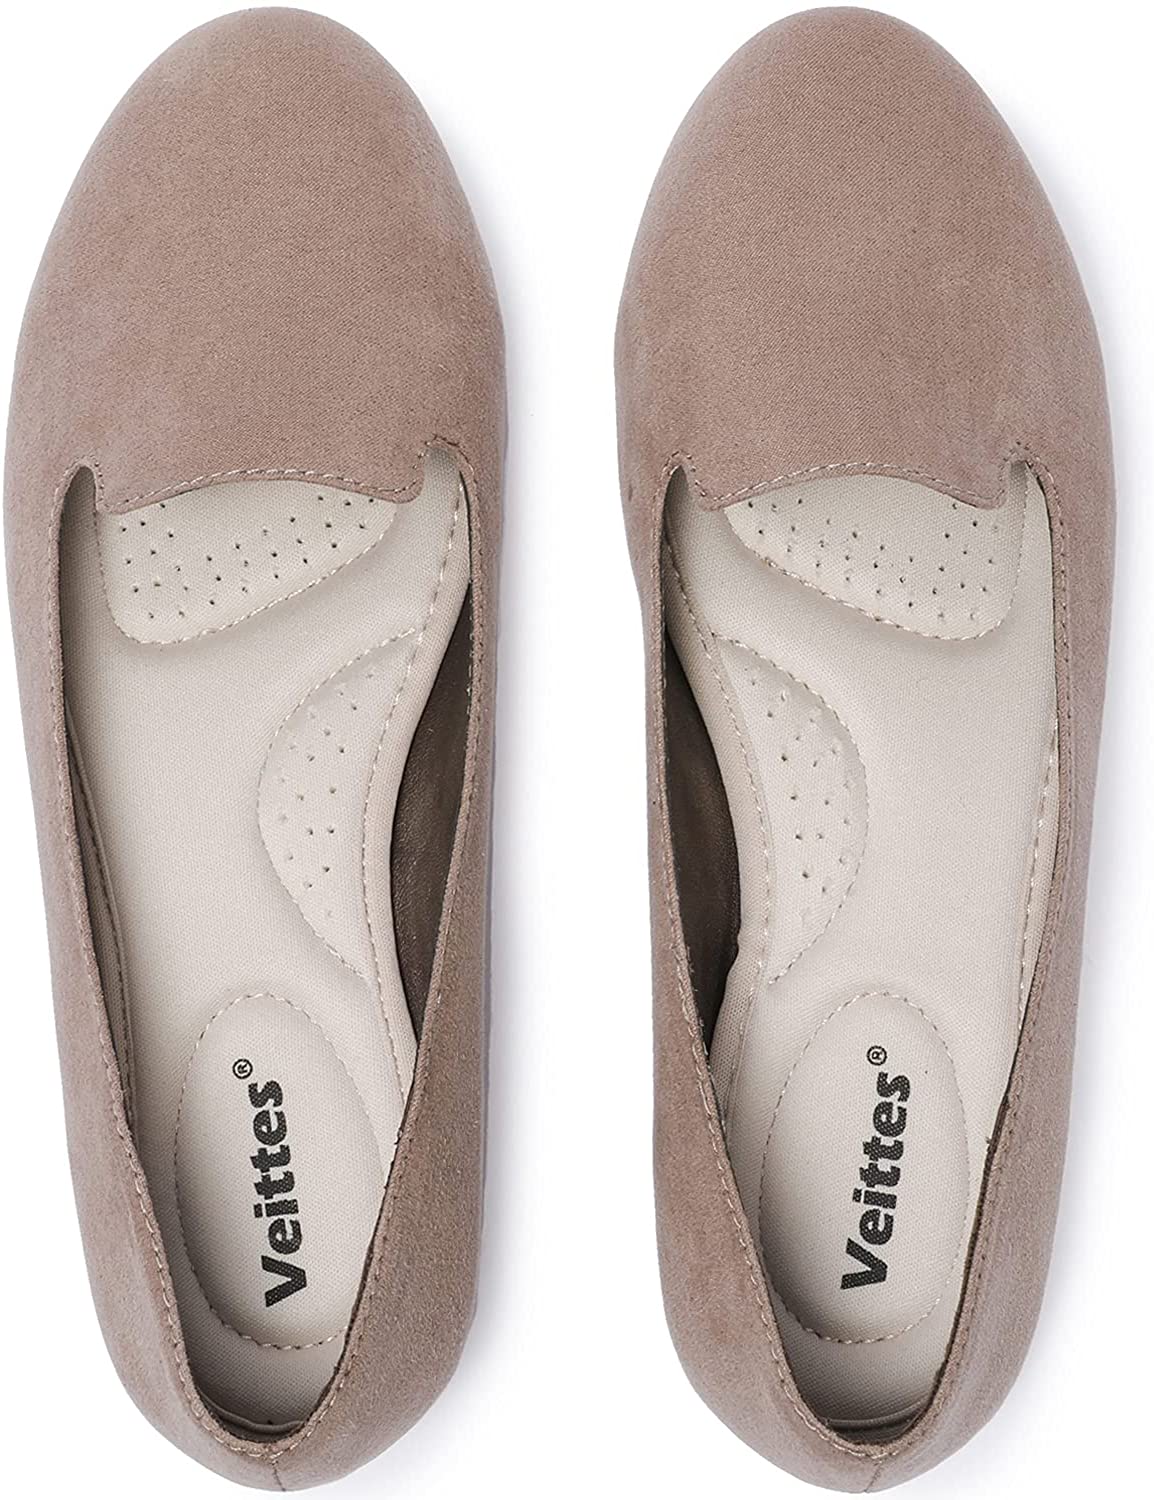 Veittes Women's Flat Shoes,Round Toe Classic Cute Suede Ballet Flats. 